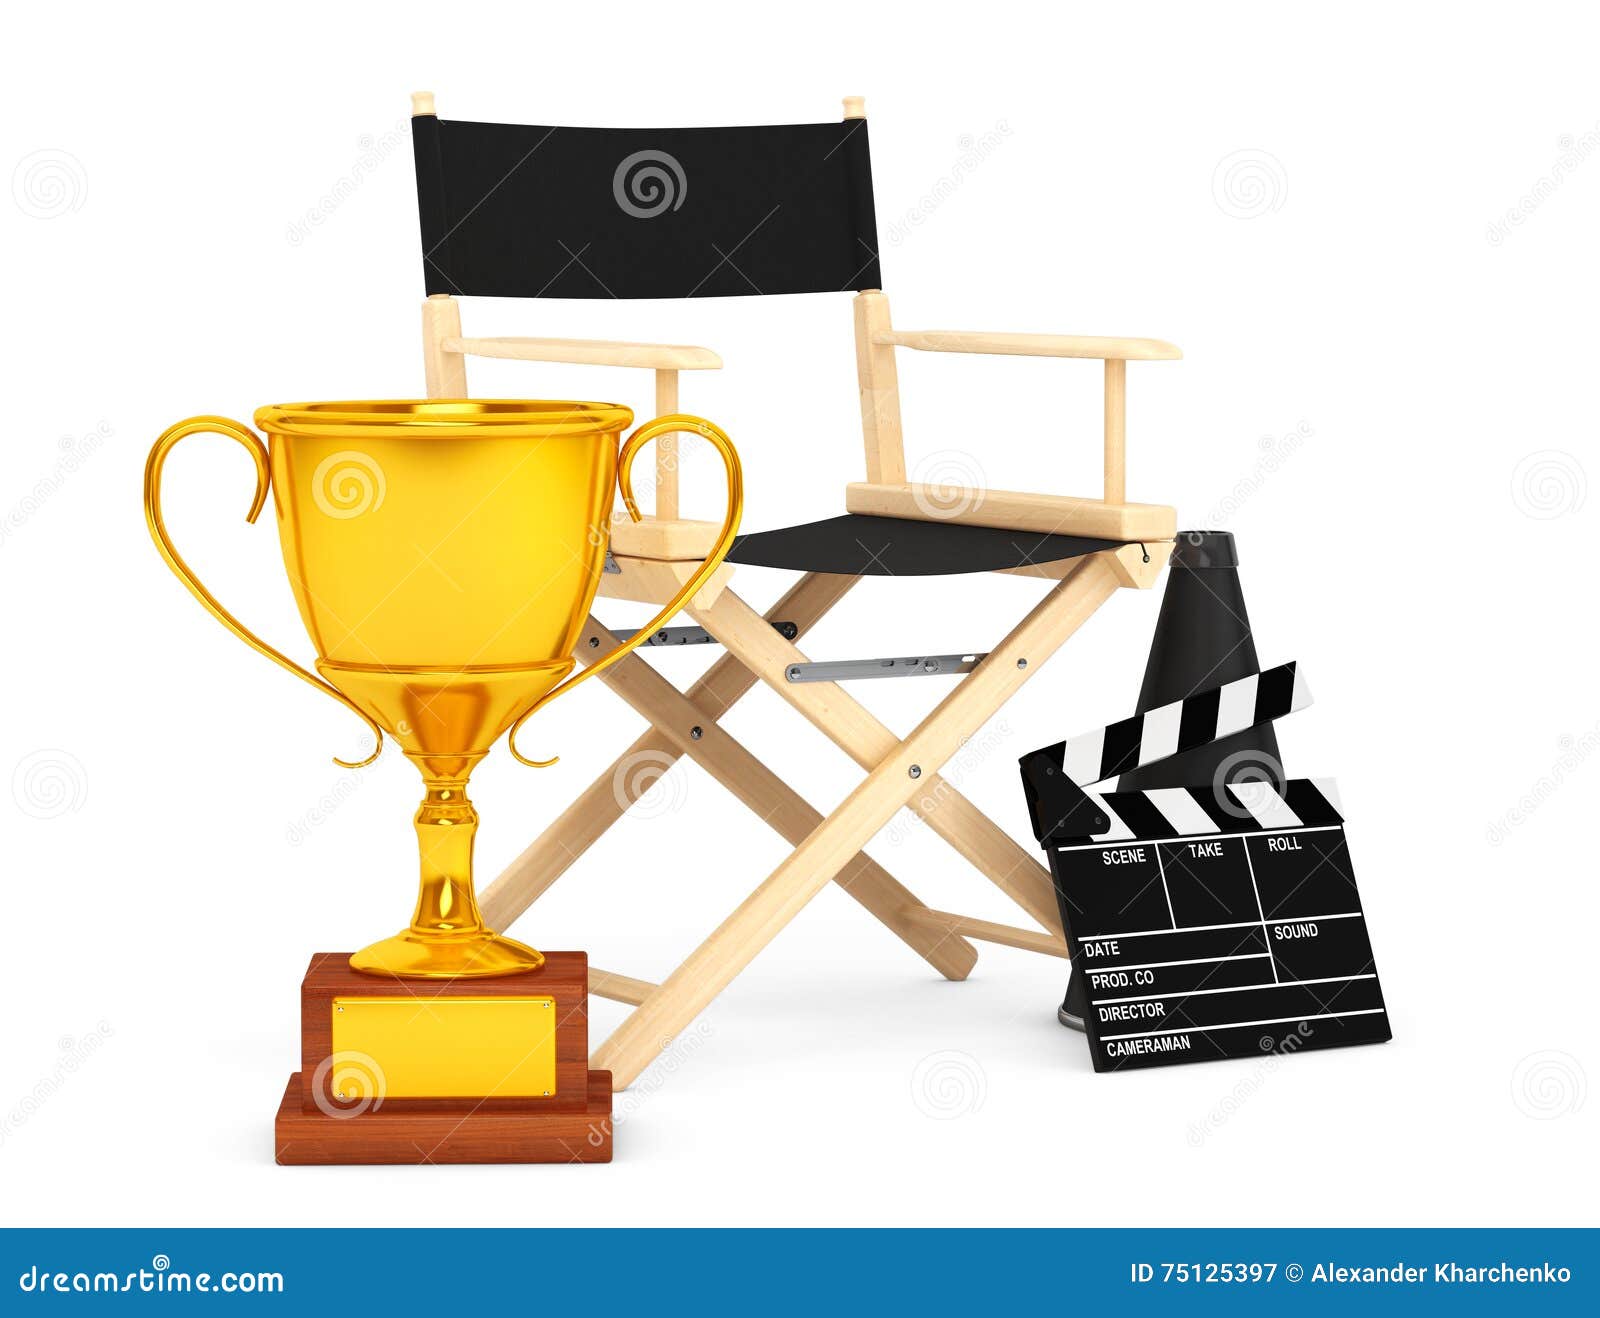 Director Chair, Movie Clapper And Megaphone With Golden Trophy. Stock